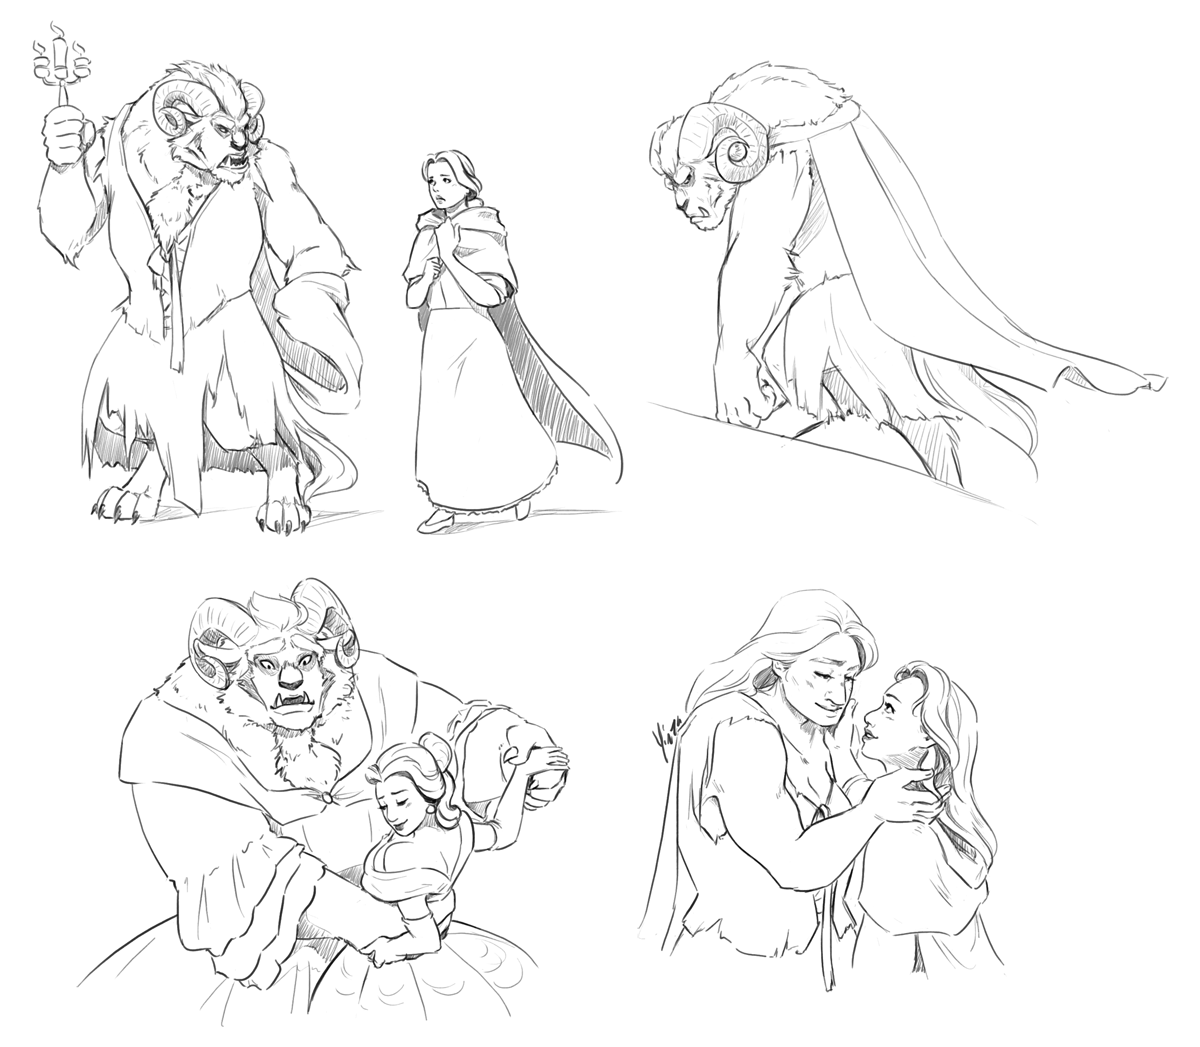 Sketches of Beauty and the Beast if they were both women.